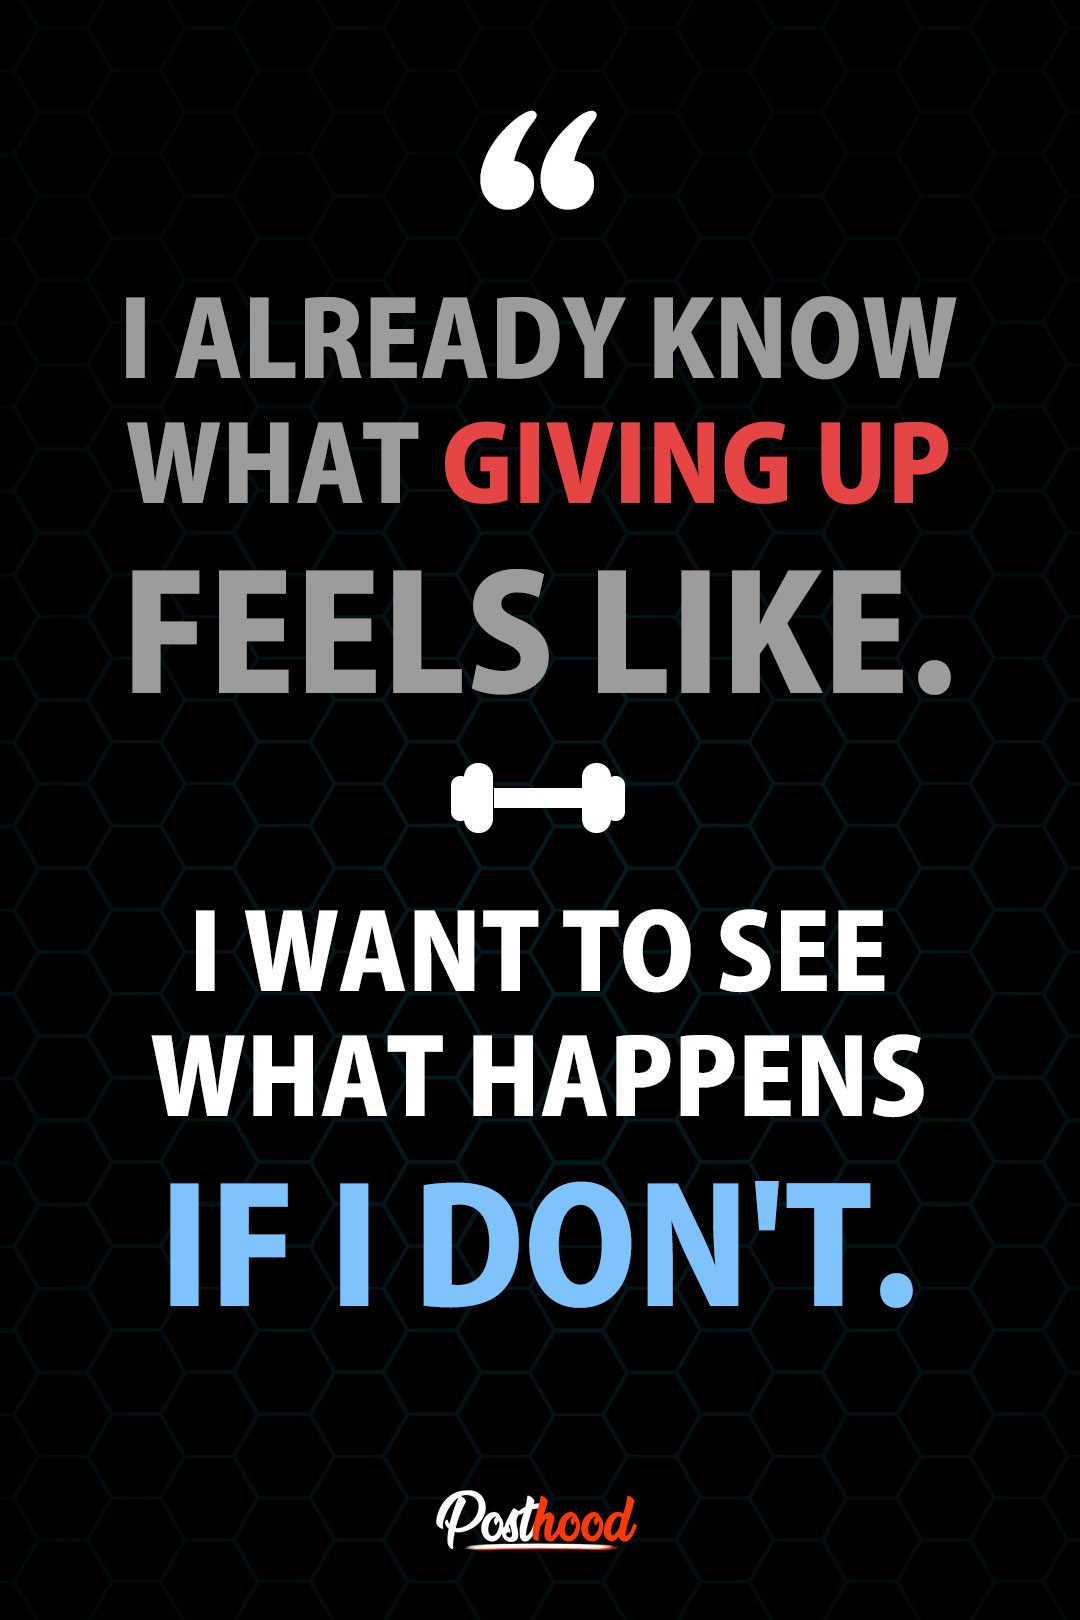 I Already Know What GIVING UP Feels Like. I Want To See What Happens IF I DON’T. Best Morning Workout Motivation Quotes to keep you going.